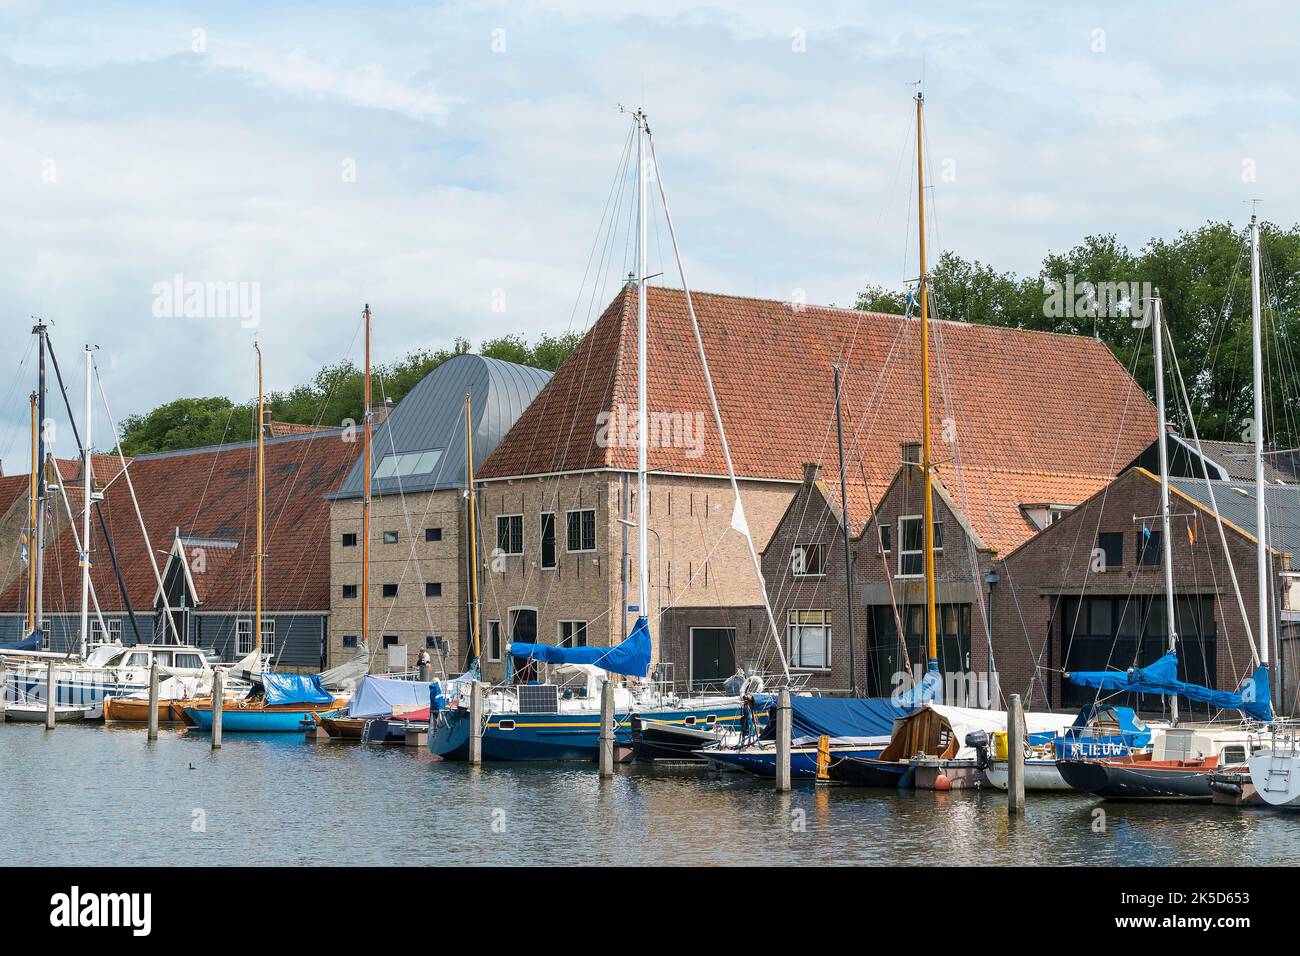 Netherlands, Enkhuizen, old town, Oosterhaven, harbor, quay, sailboats Stock Photo